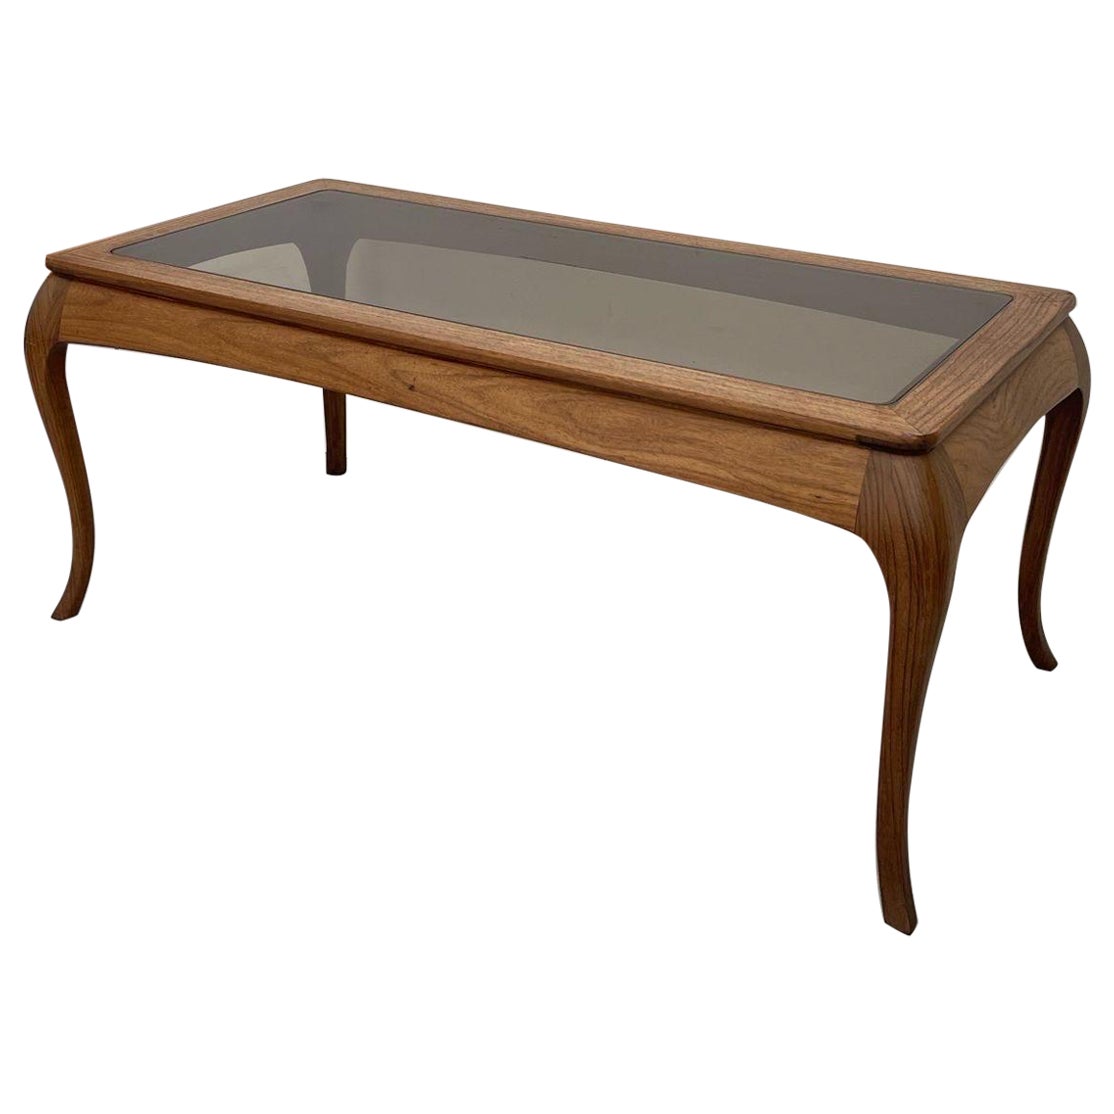 Vintage Wooden Coffee Table With Curved Legs and Smoked Glass Top. For Sale